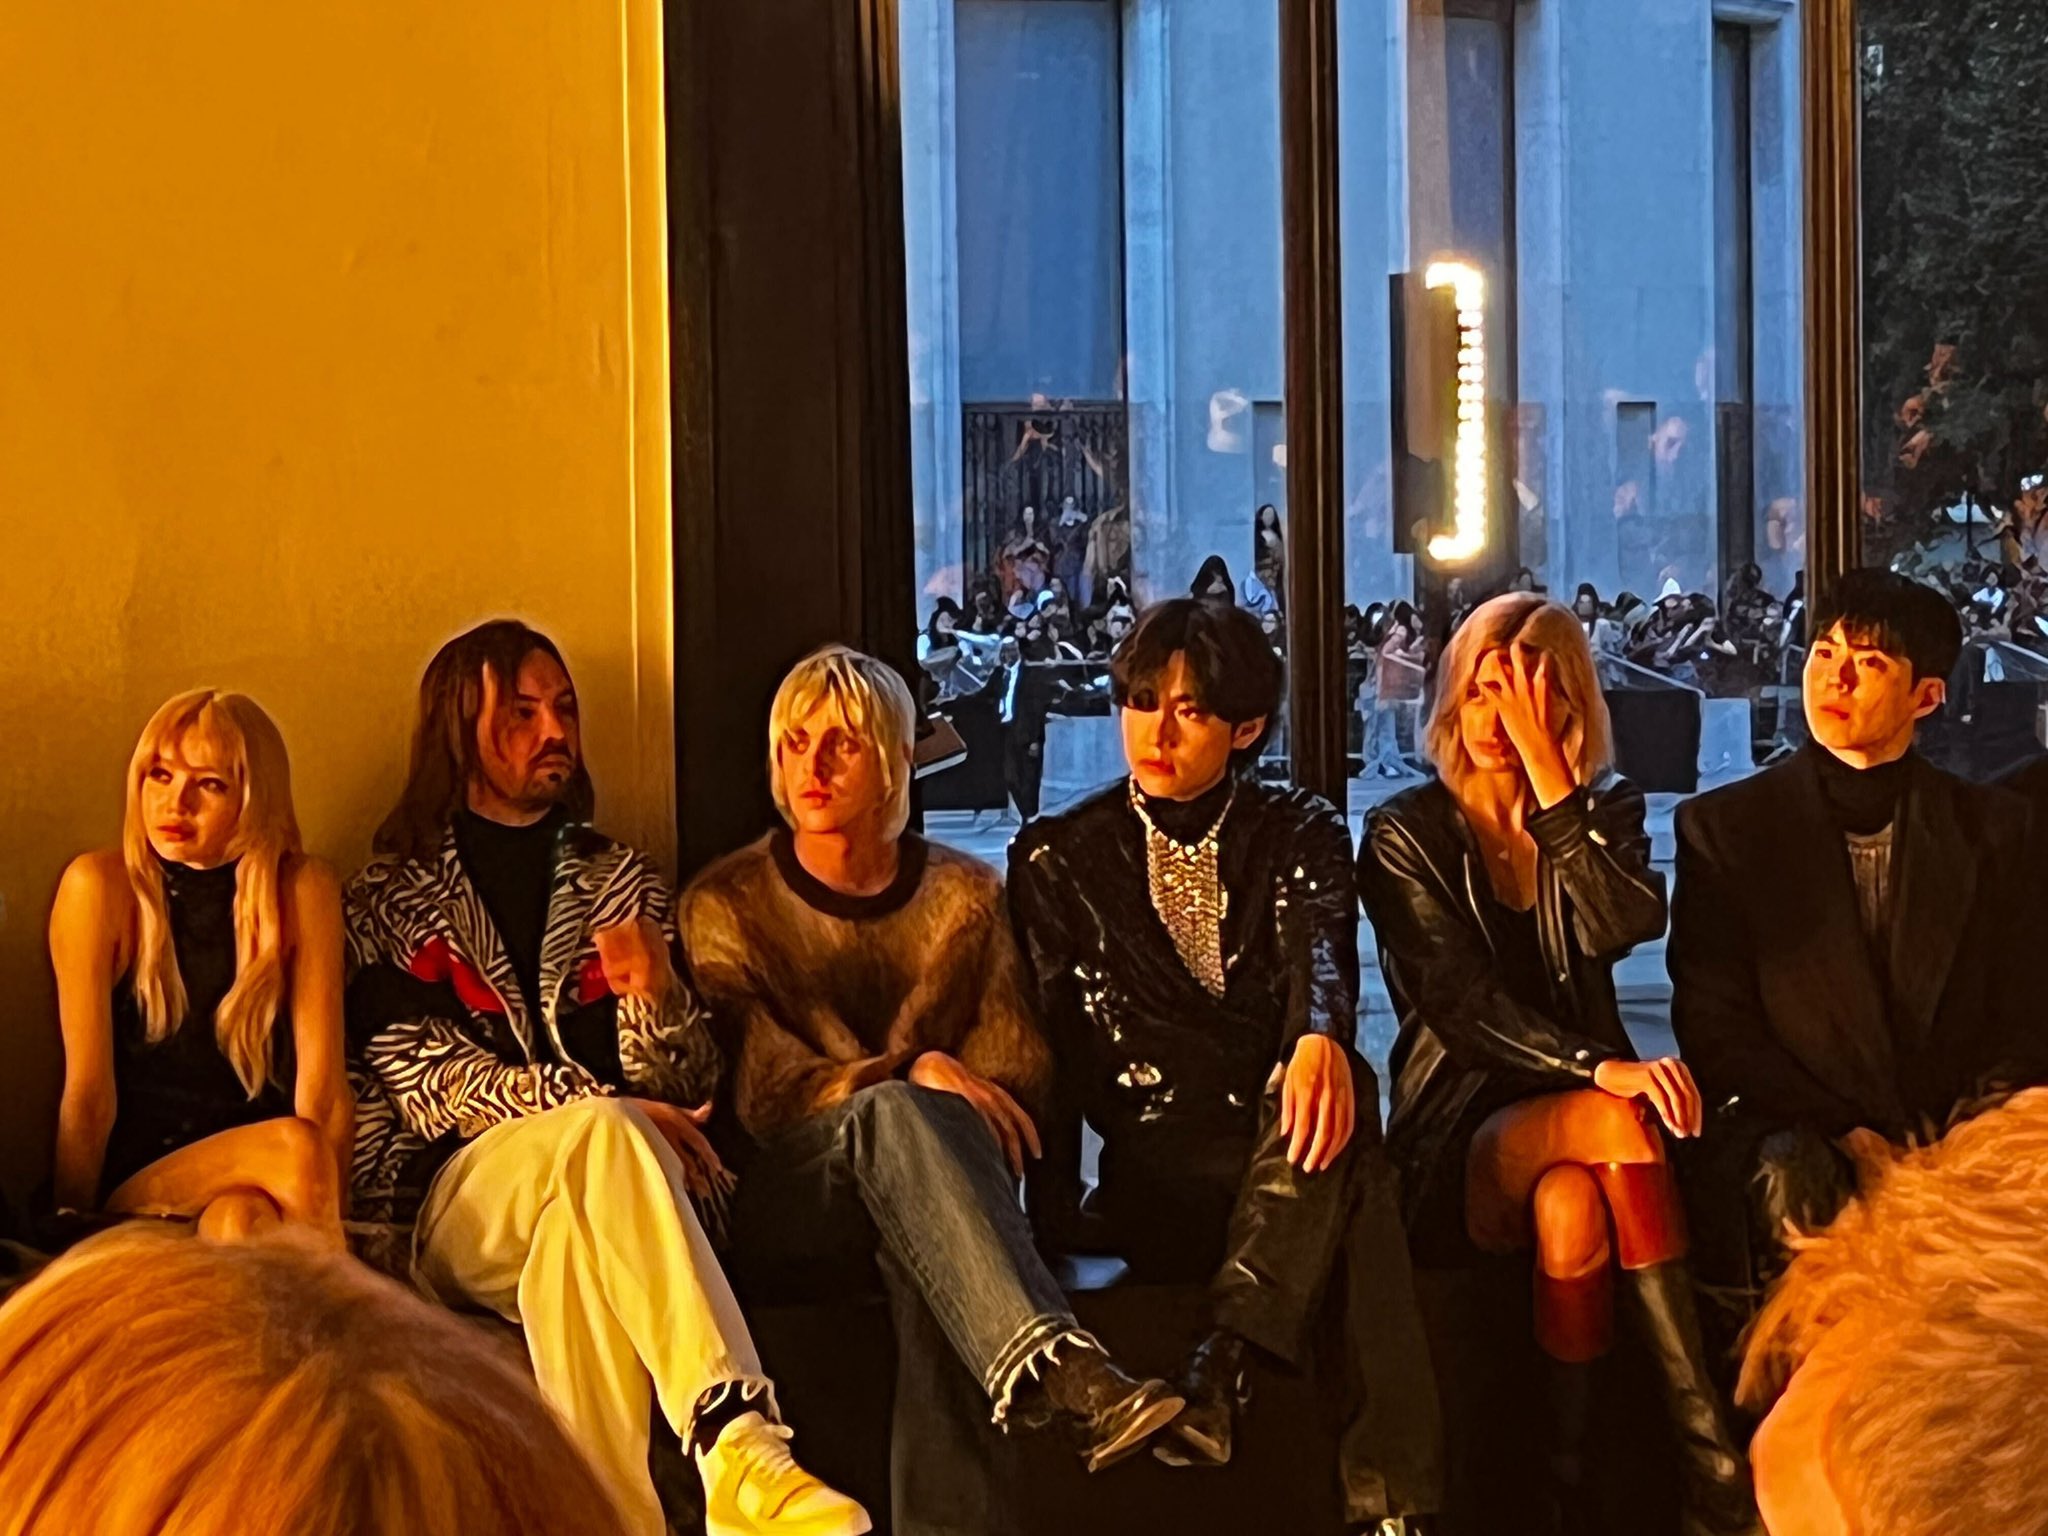 Kook tea on X: Taehyung and Lisa in one frame sitting together at